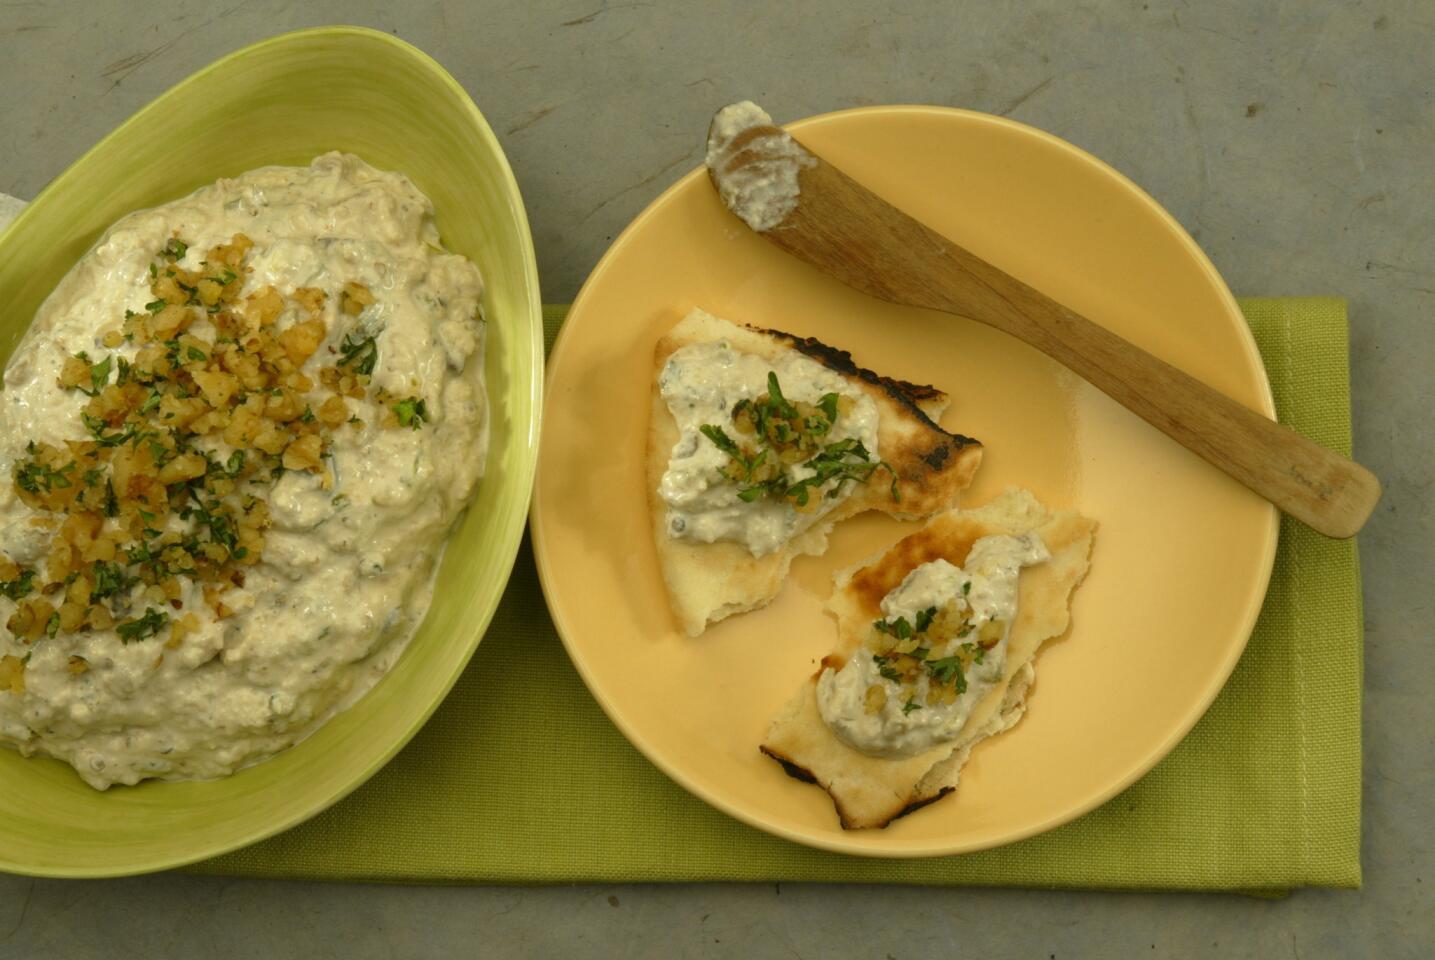 This creamy, smooth roasted eggplant dip will have all the ladies swooning.